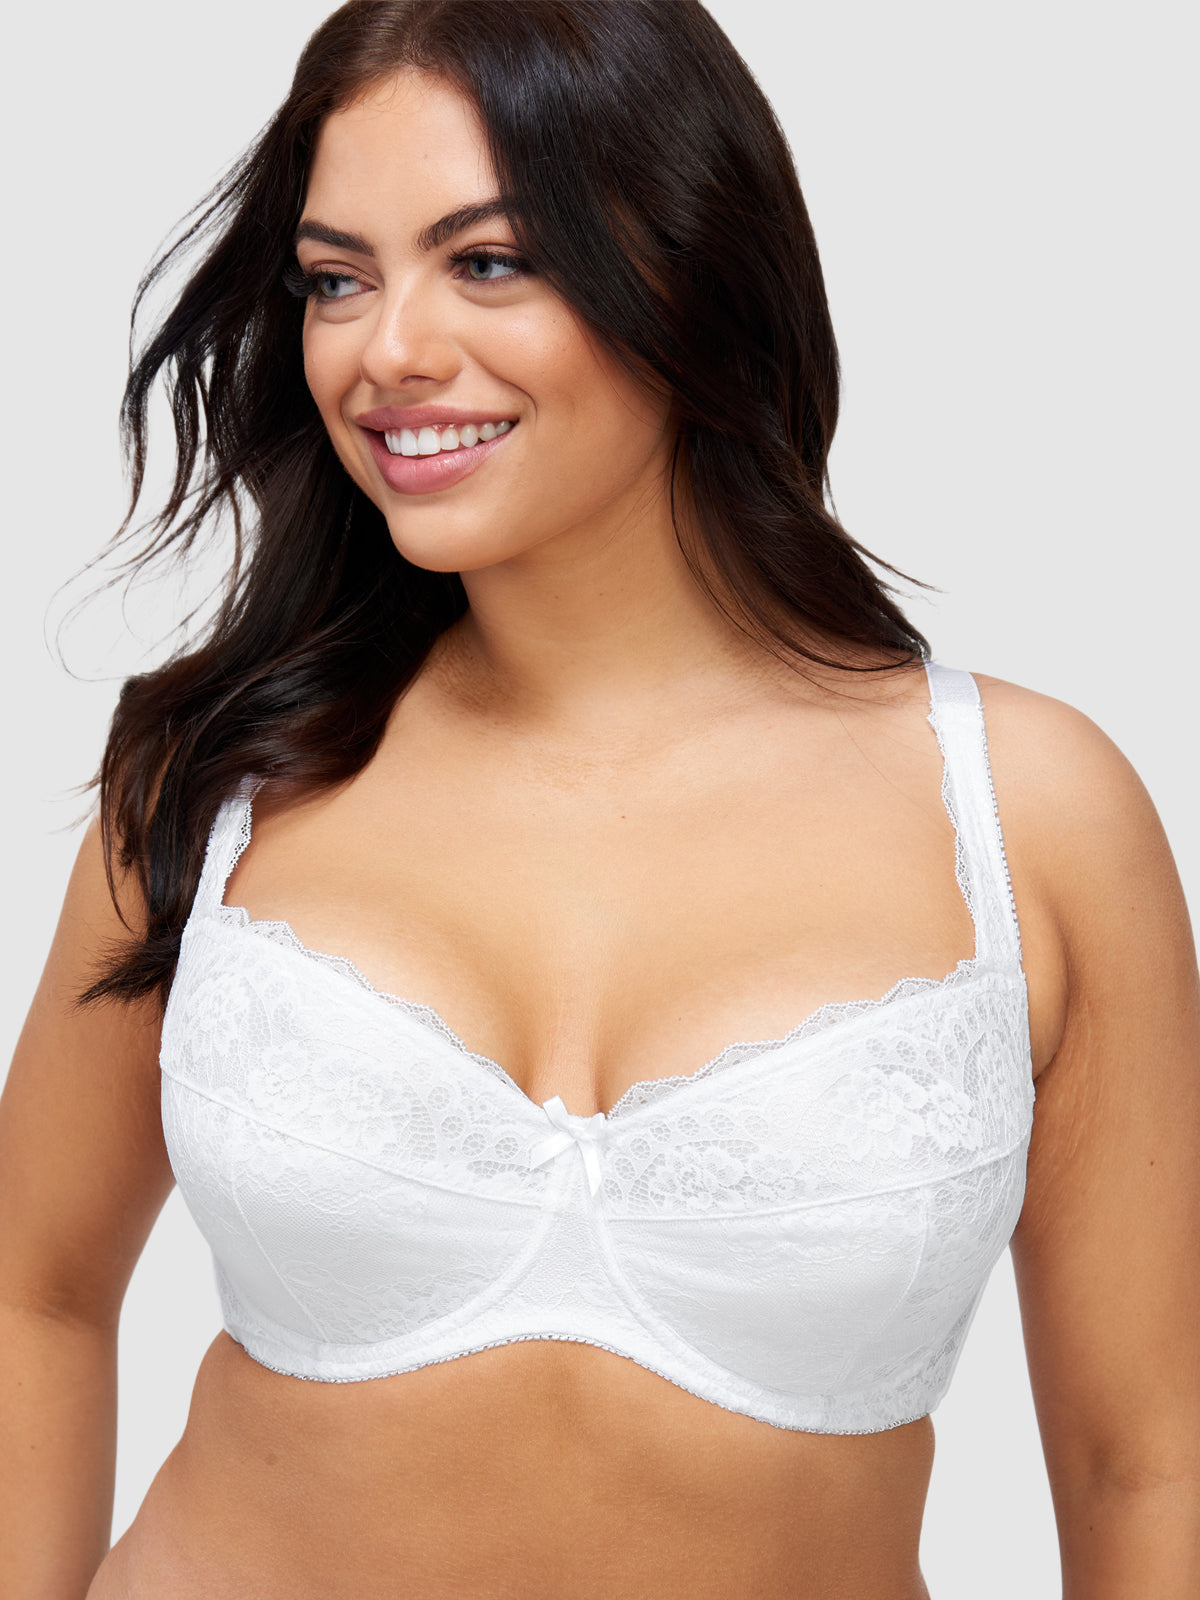 Women Big Size Bra 1/2 Cup Push Up Bras With Underwire Adhesive